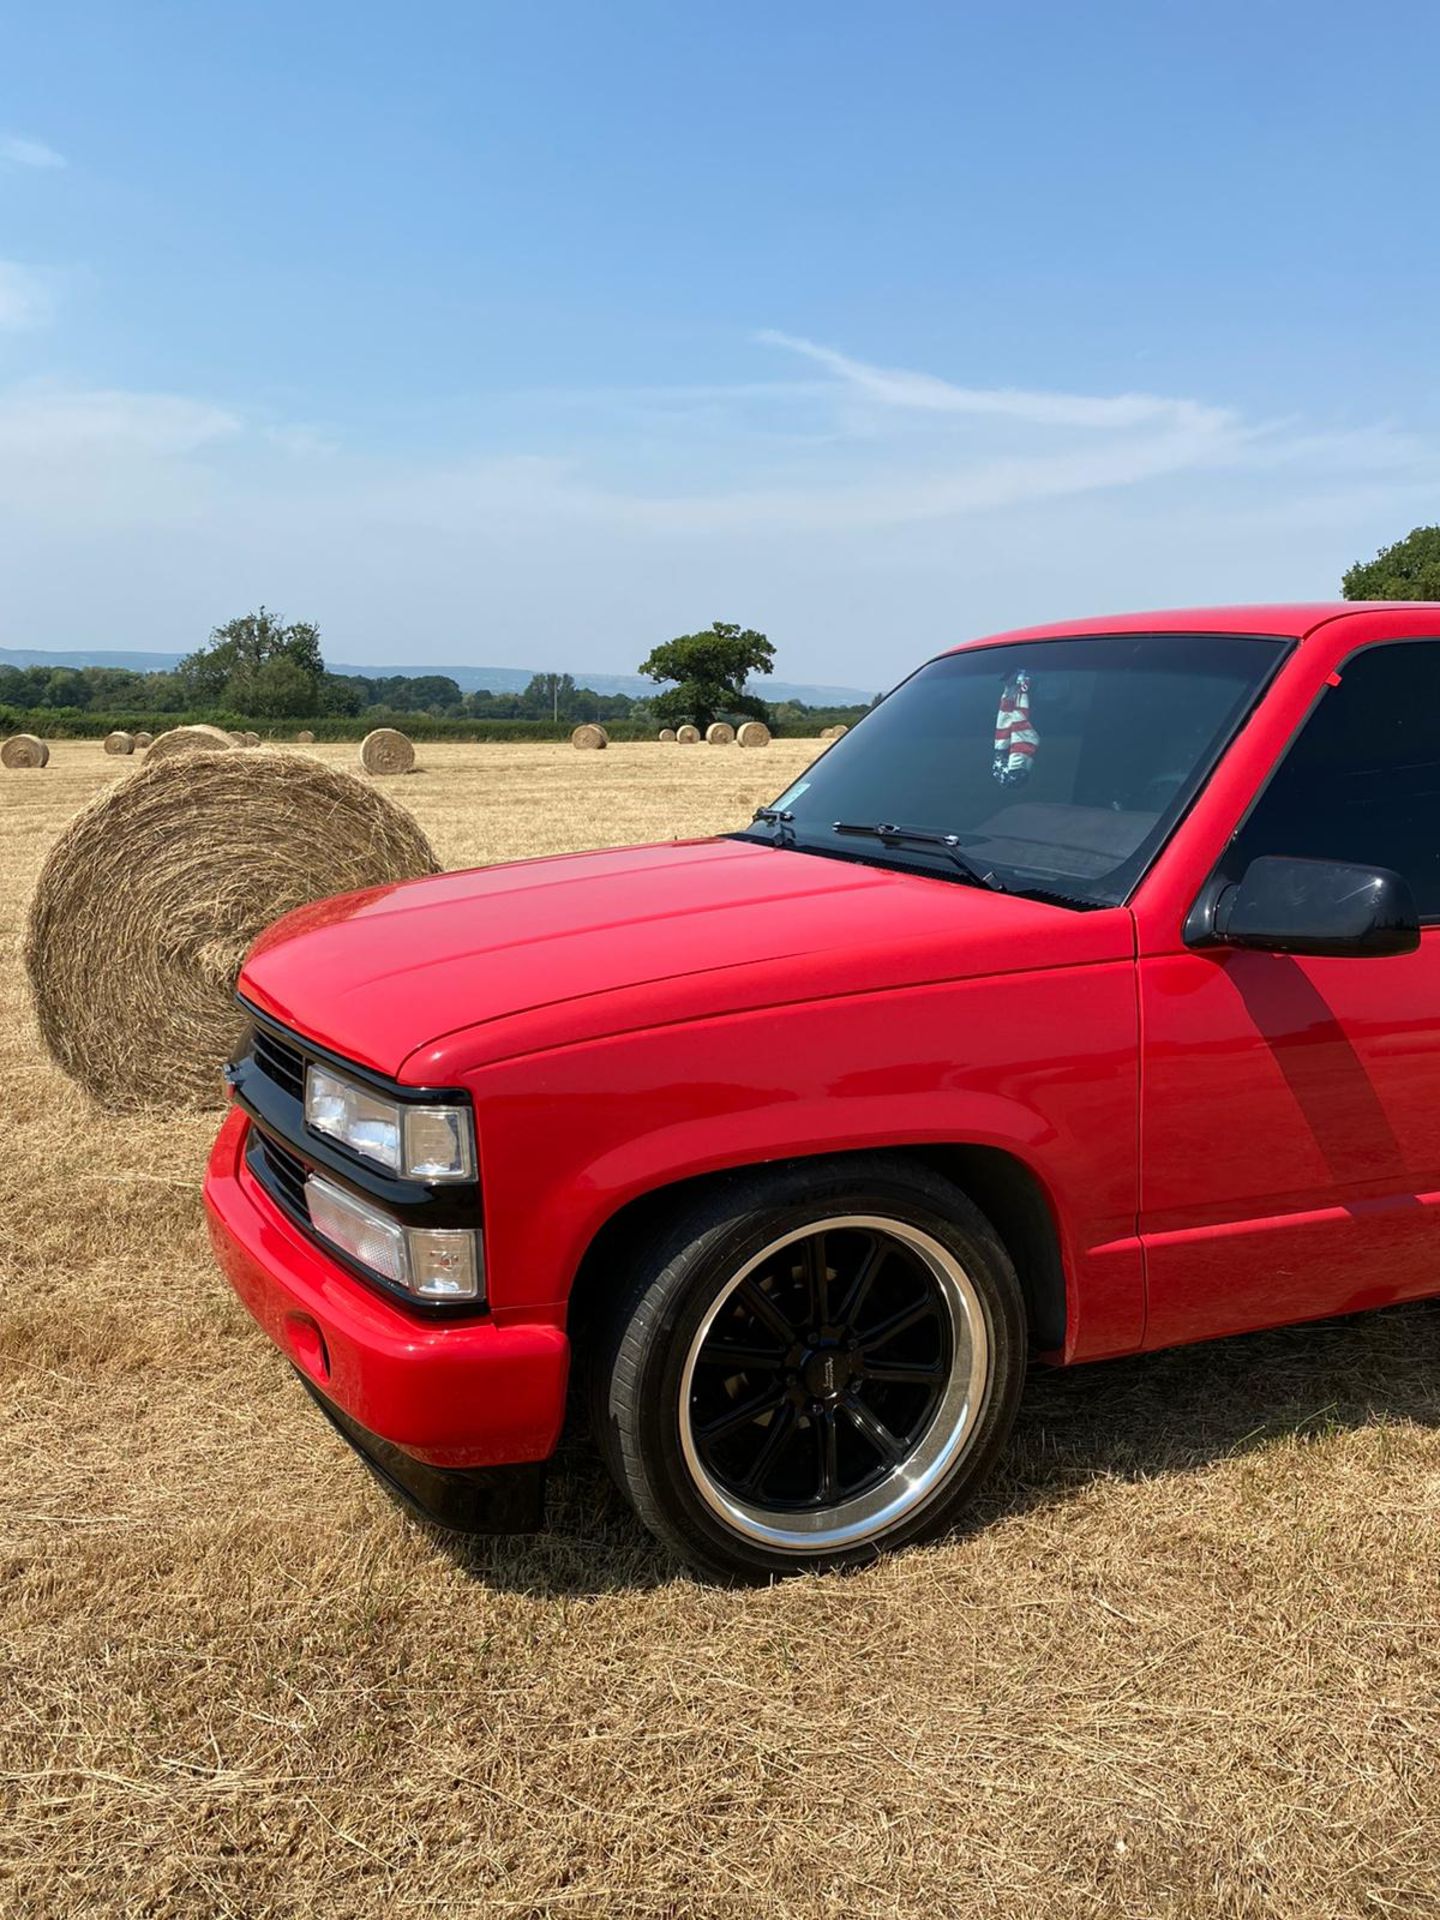 Super Red 1988 Chevrolet C1500 / OBS / GMT-400 - Single cab long bed (8ft) - Image 10 of 15